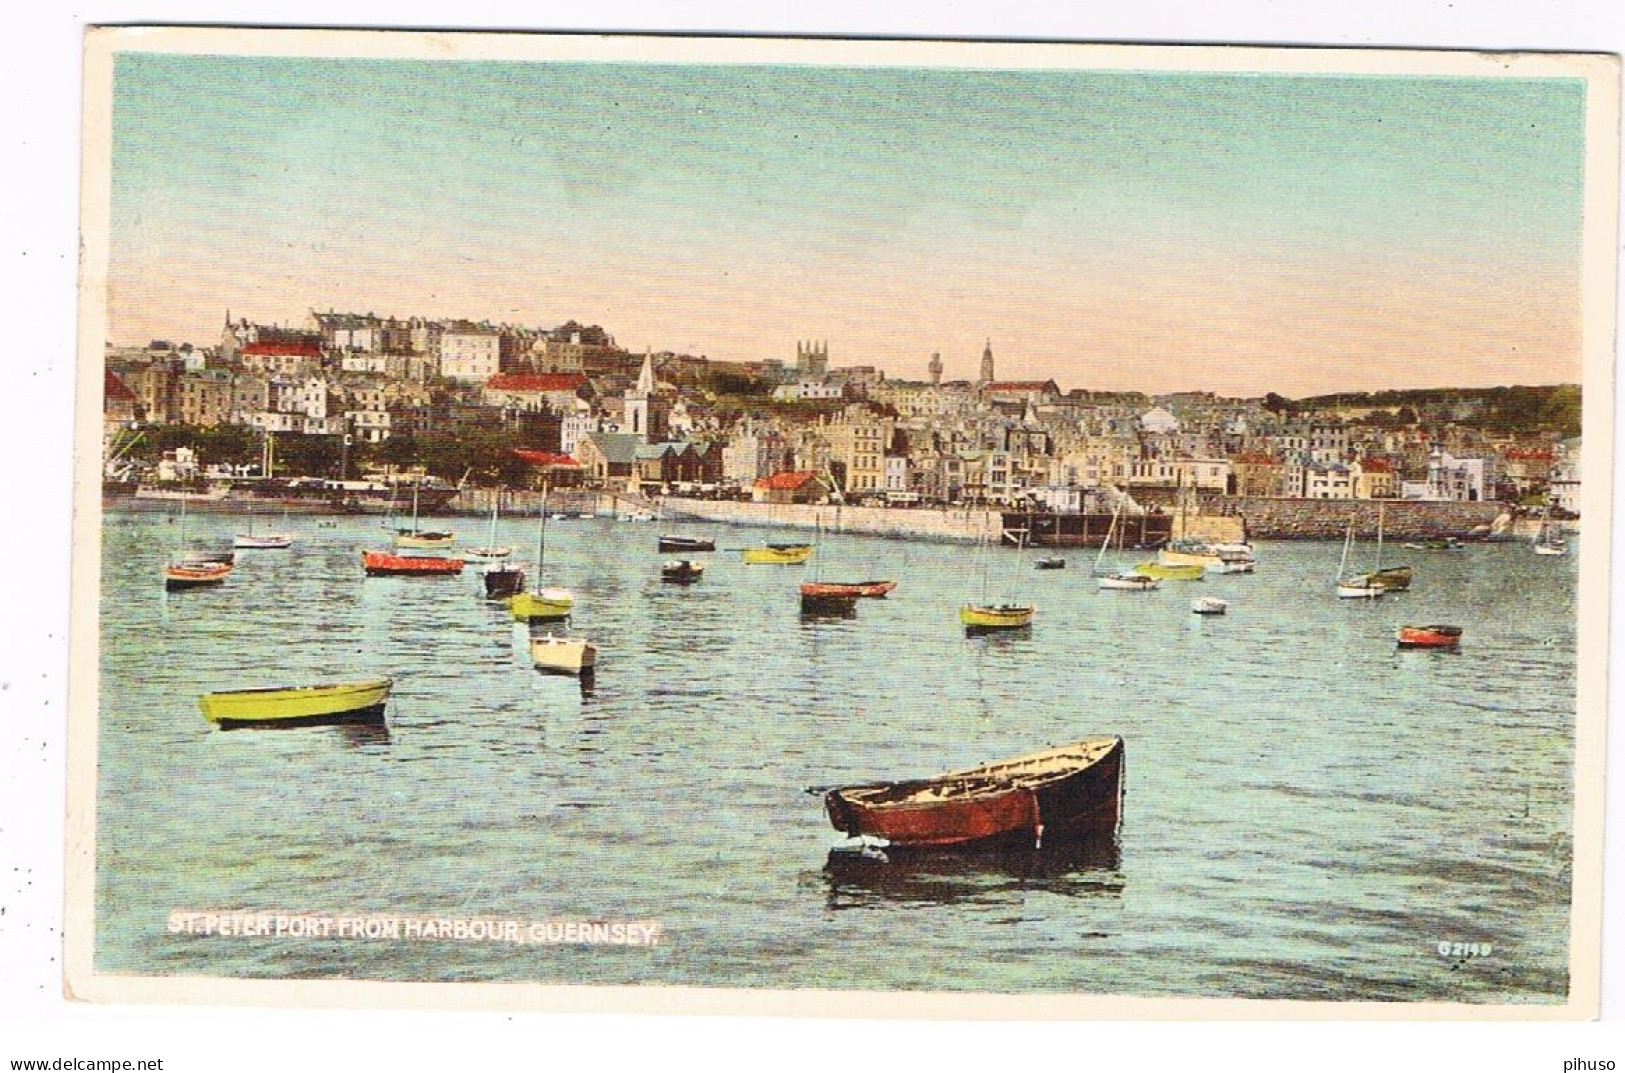 UK-4033  ST. PETER : Port From Habour - Guernsey